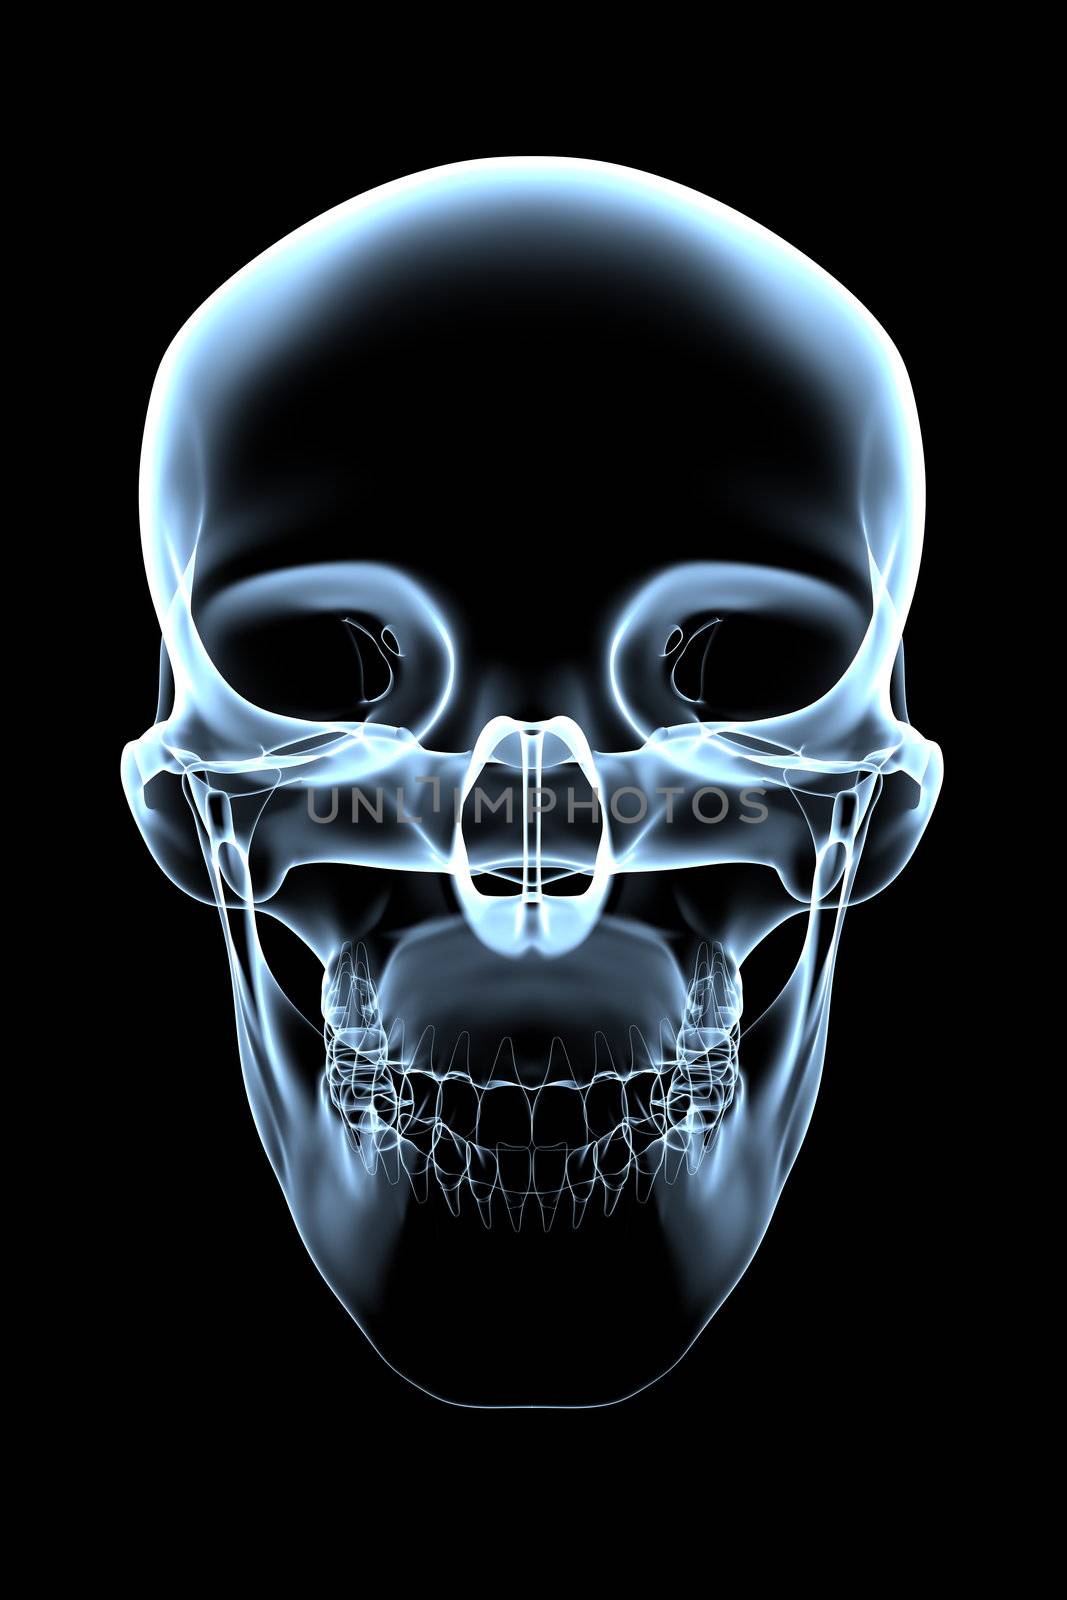 rendered bluish x-ray image of a human skull -front view